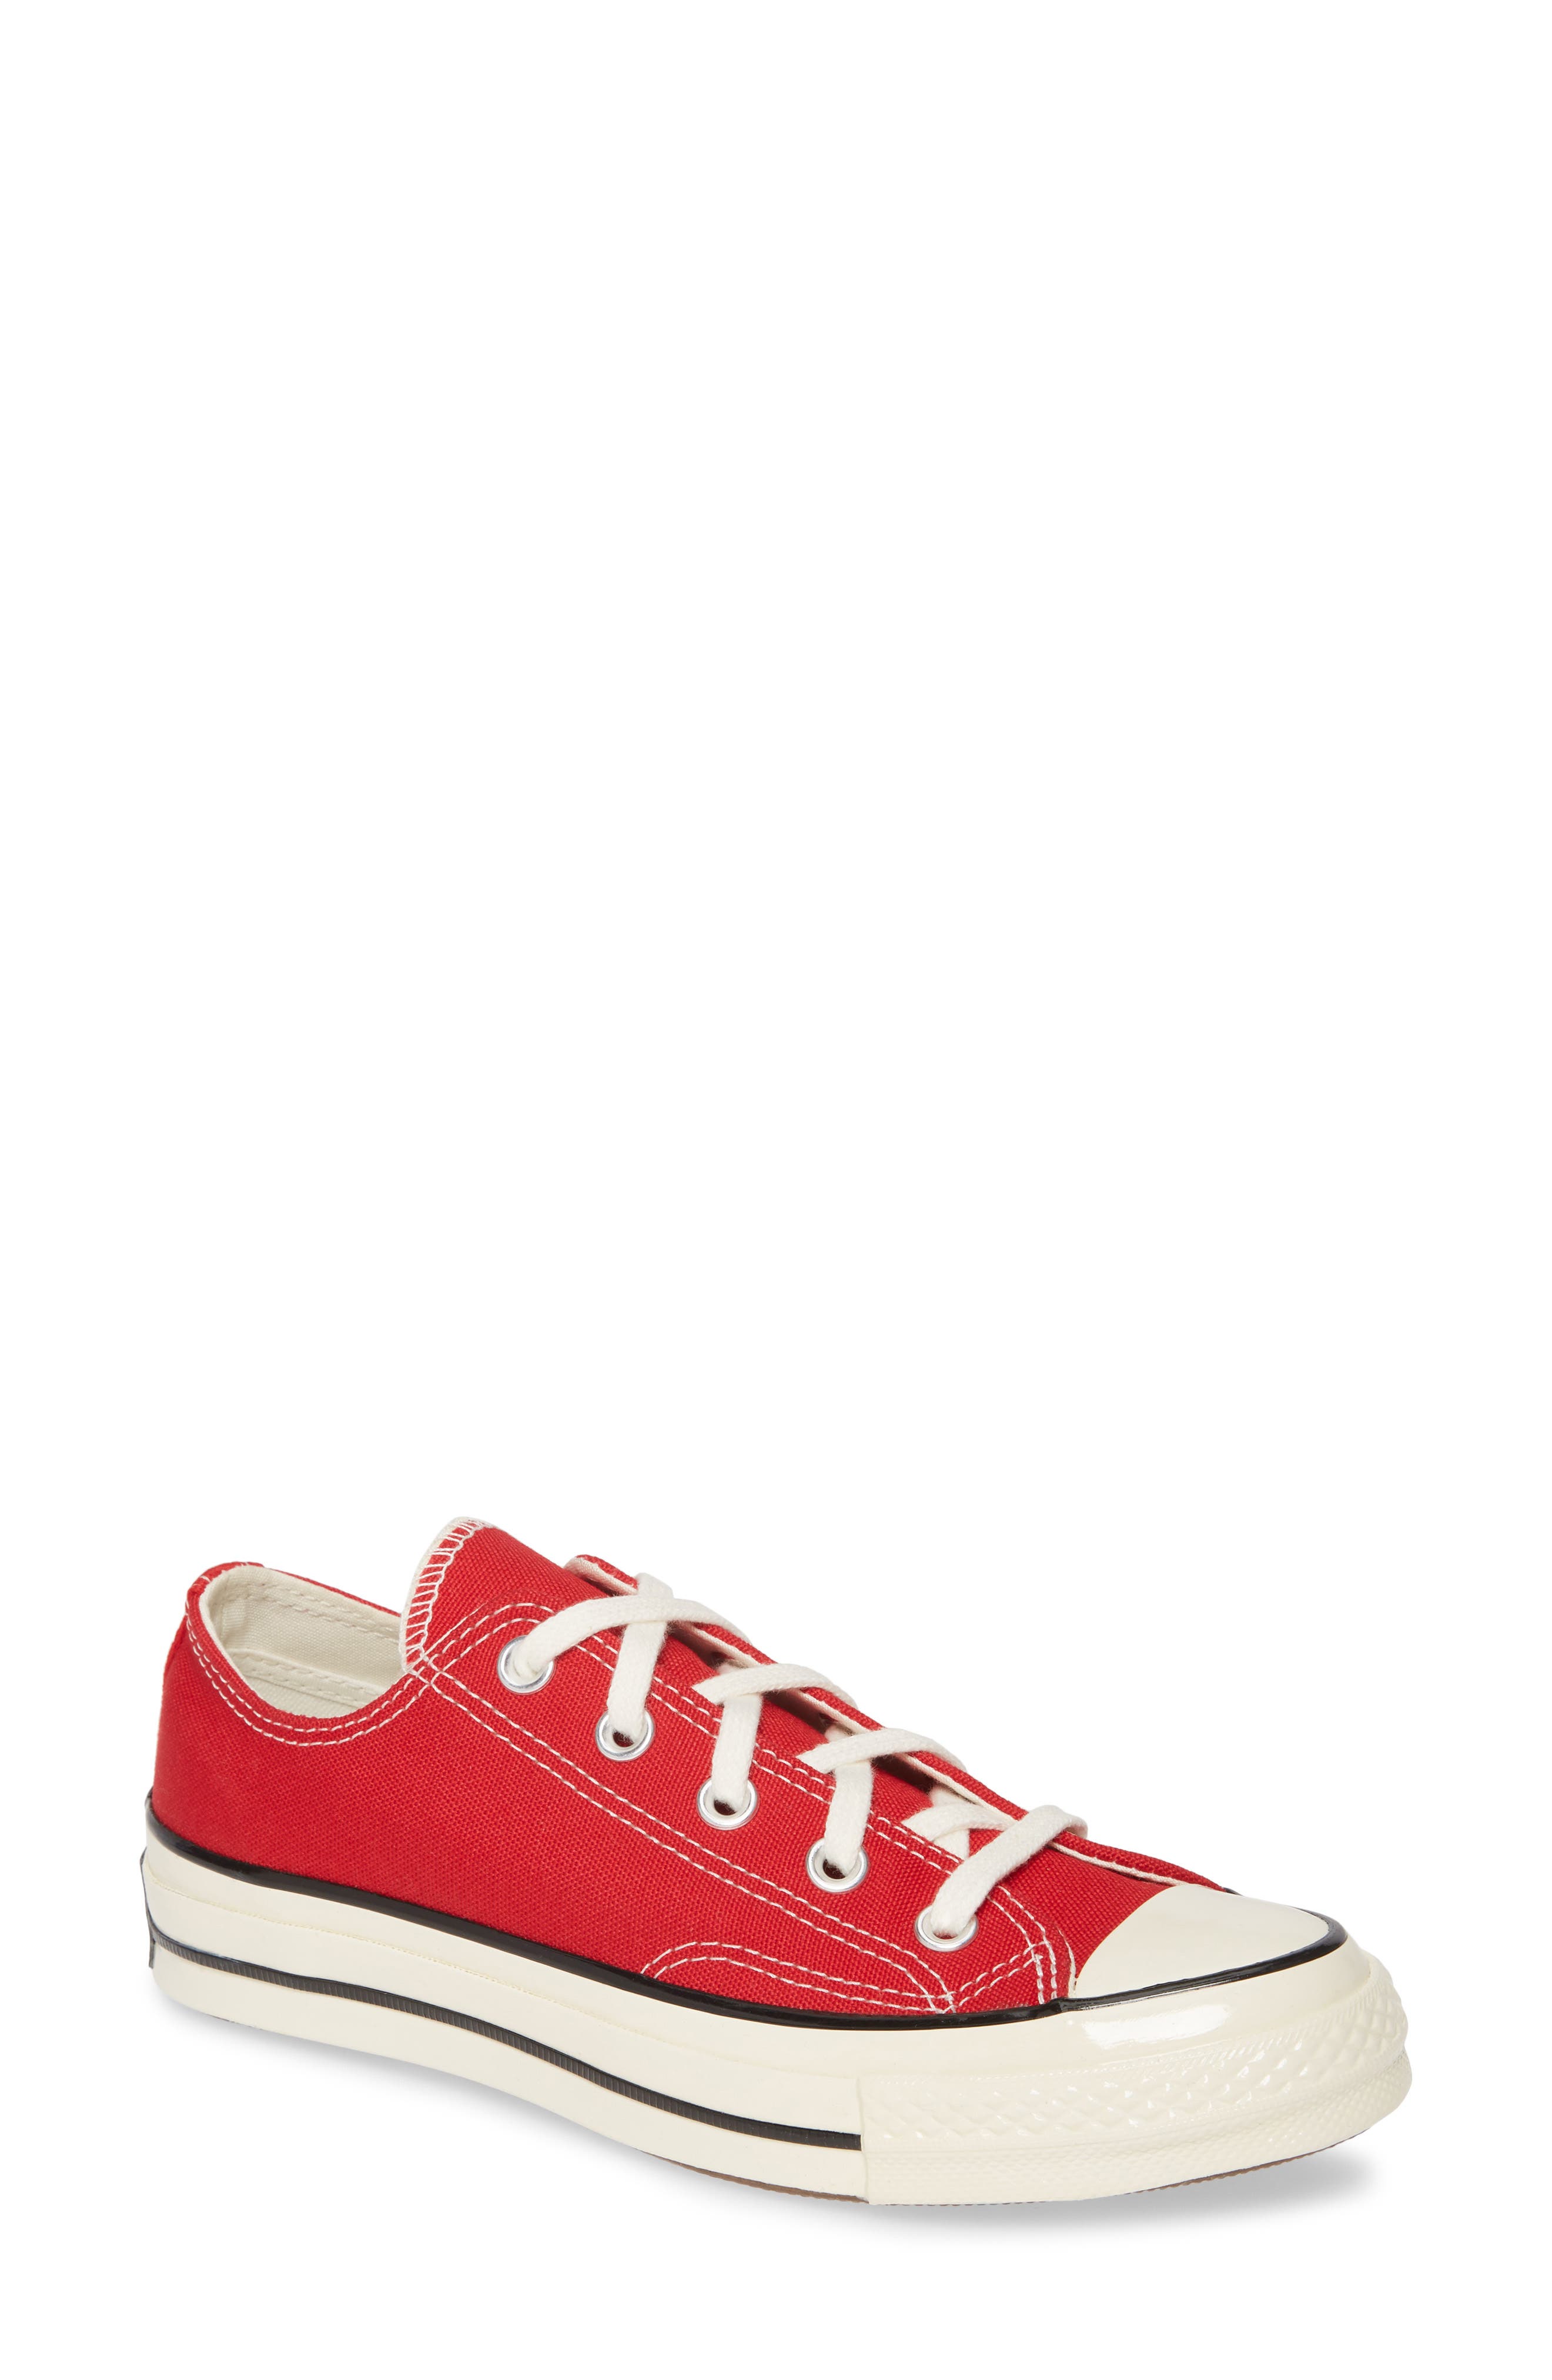 UPC 888757075843 product image for Women's Converse Chuck Taylor All Star 70 Always On Low Top Sneaker, Size 10.5 M | upcitemdb.com